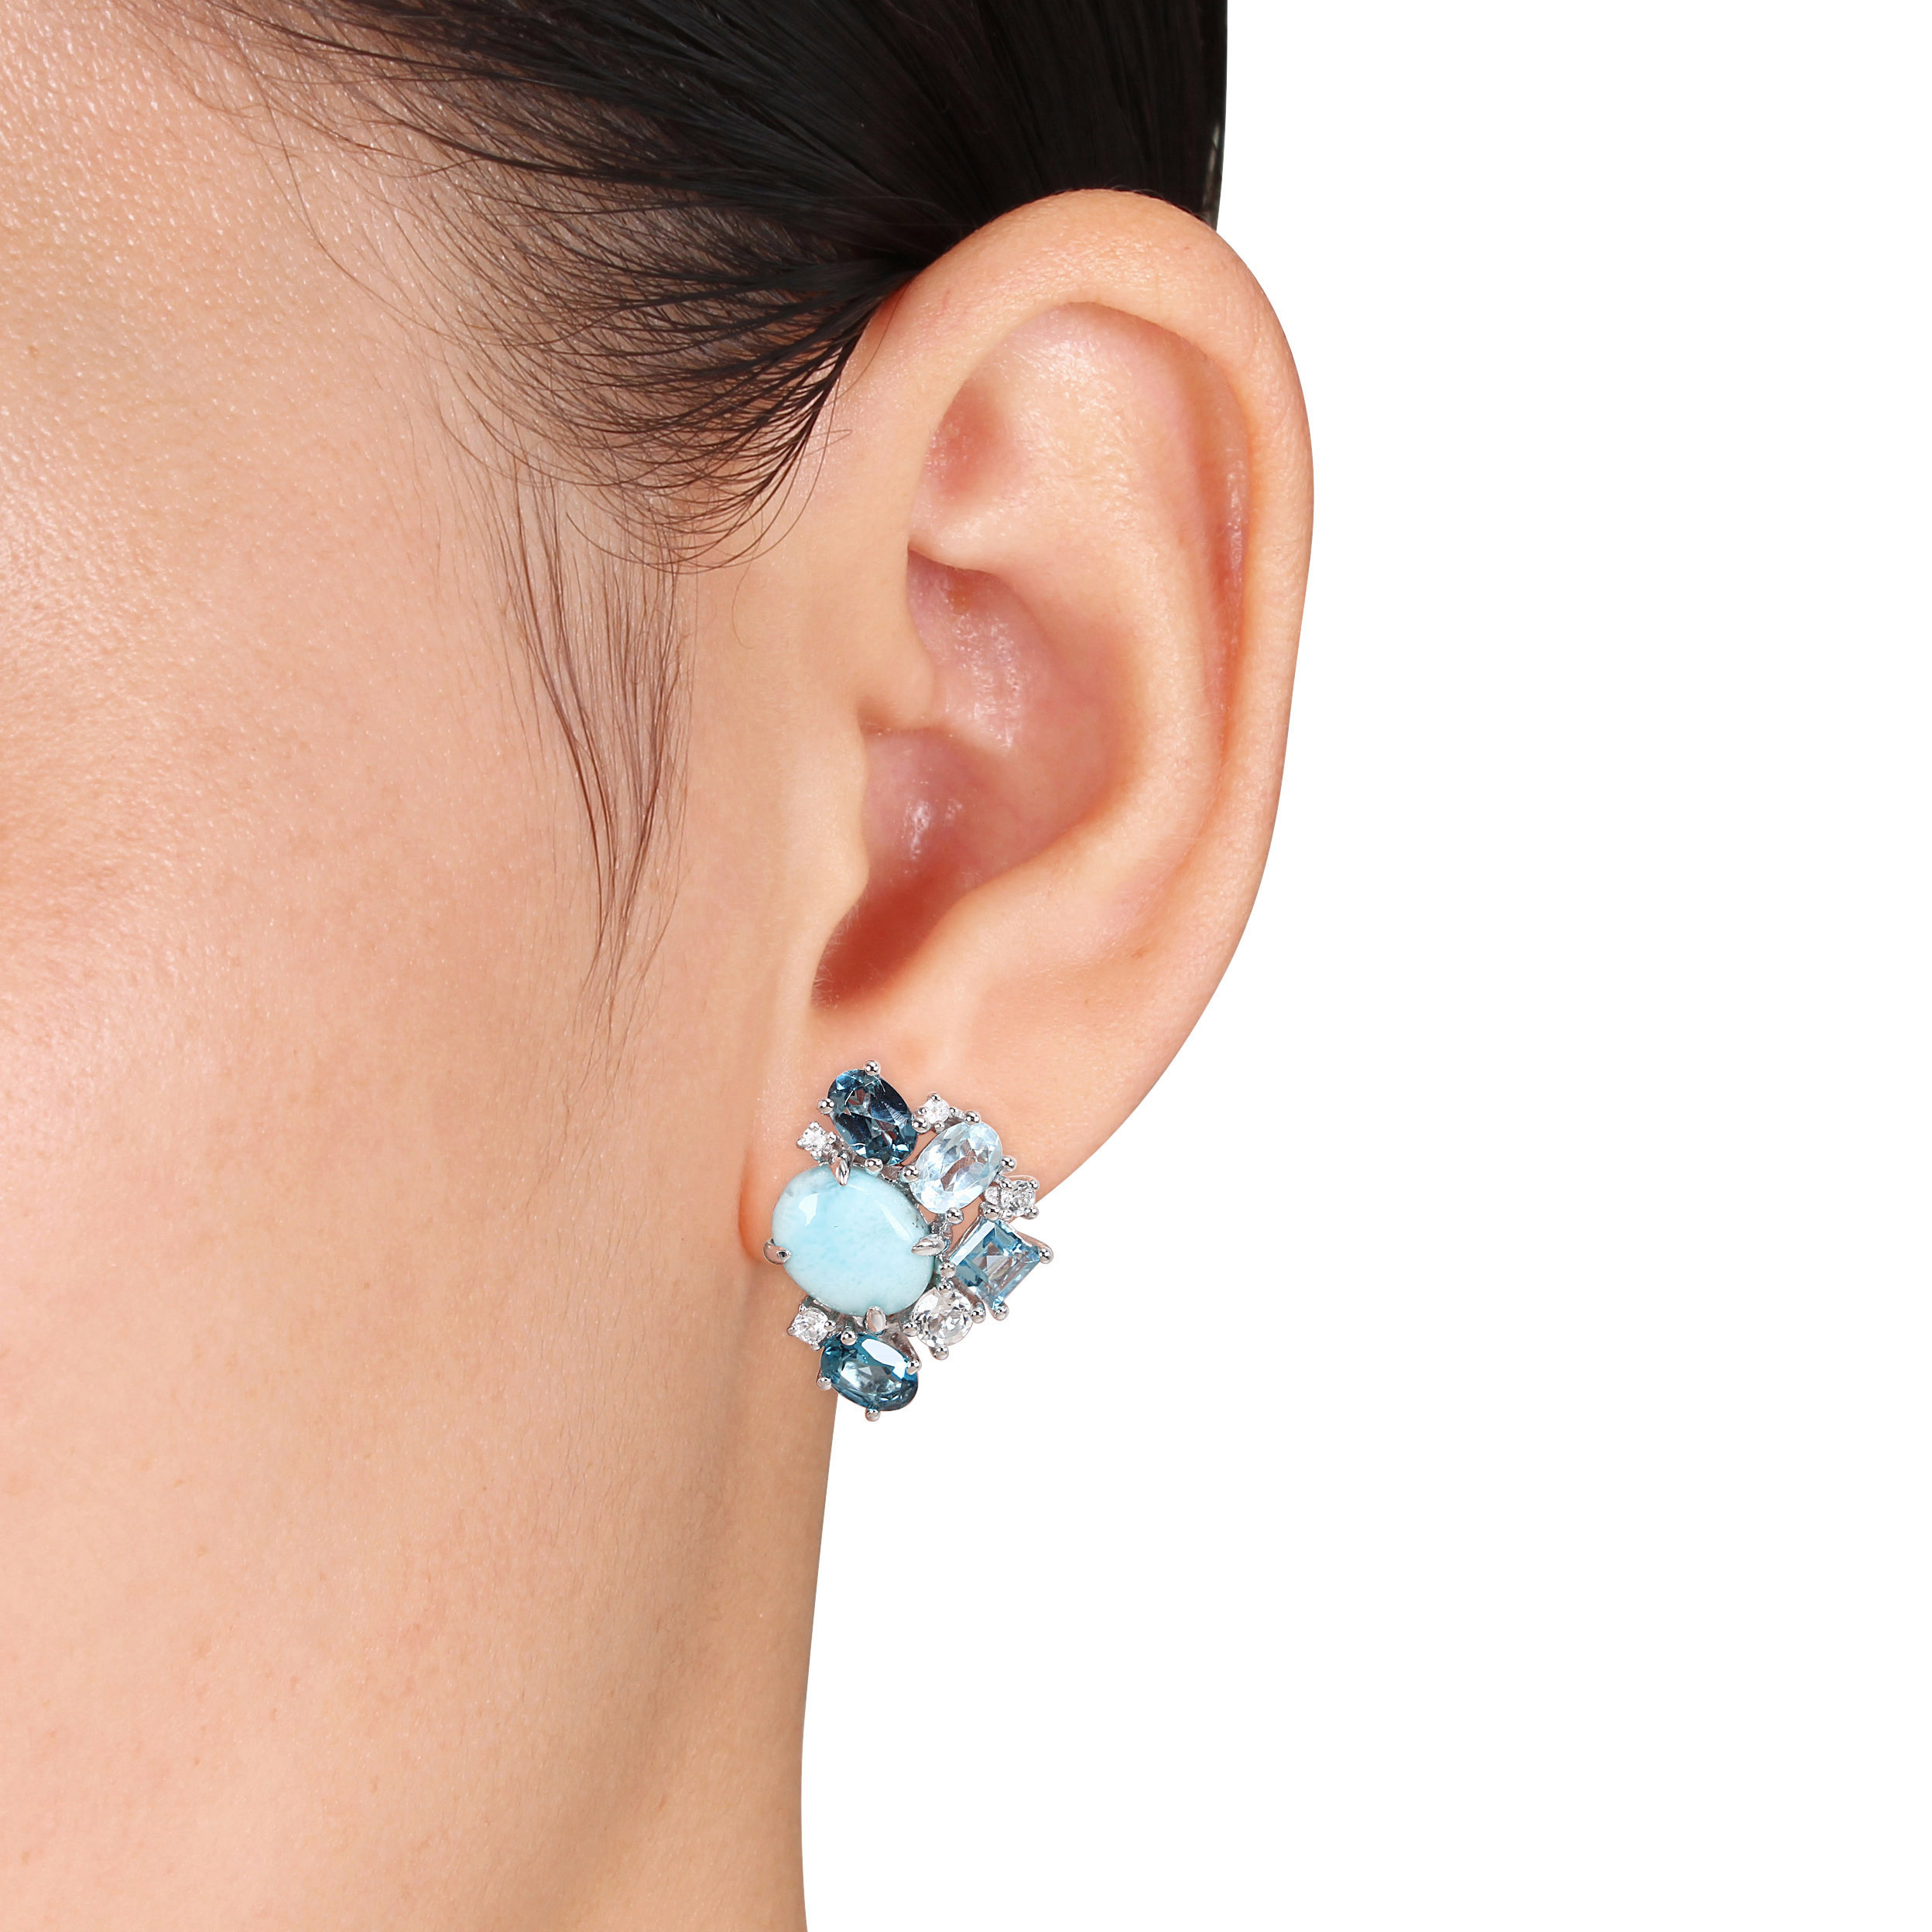 11 CT TGW Larimar, London, Sky Blue and White Topaz Cluster Earrings in Sterling Silver